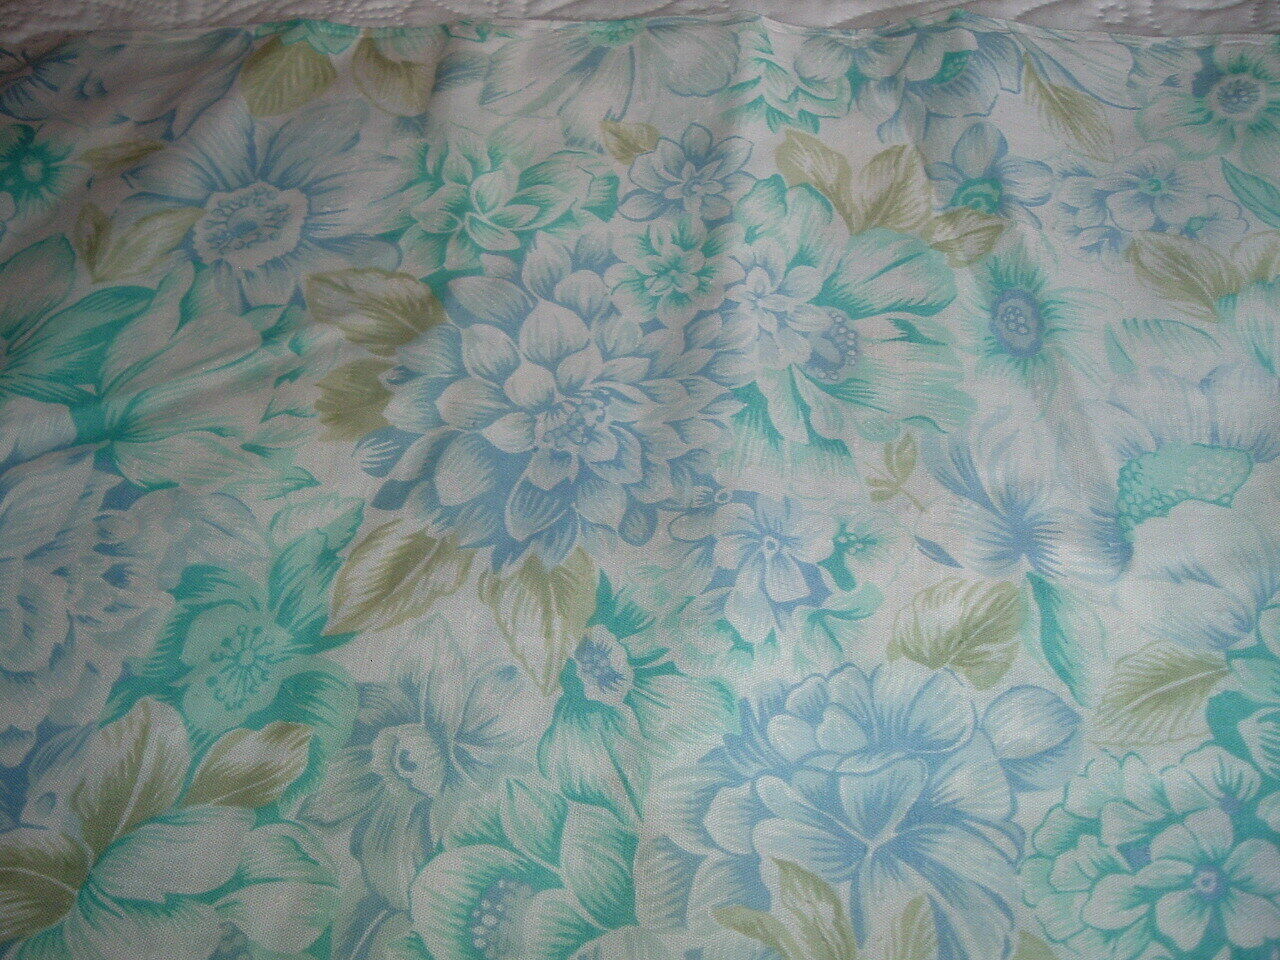 Vtg 80s Daisy Flowers Teal Blue Sage Green Linen Like Sew Fabric 36x43 BTY #554